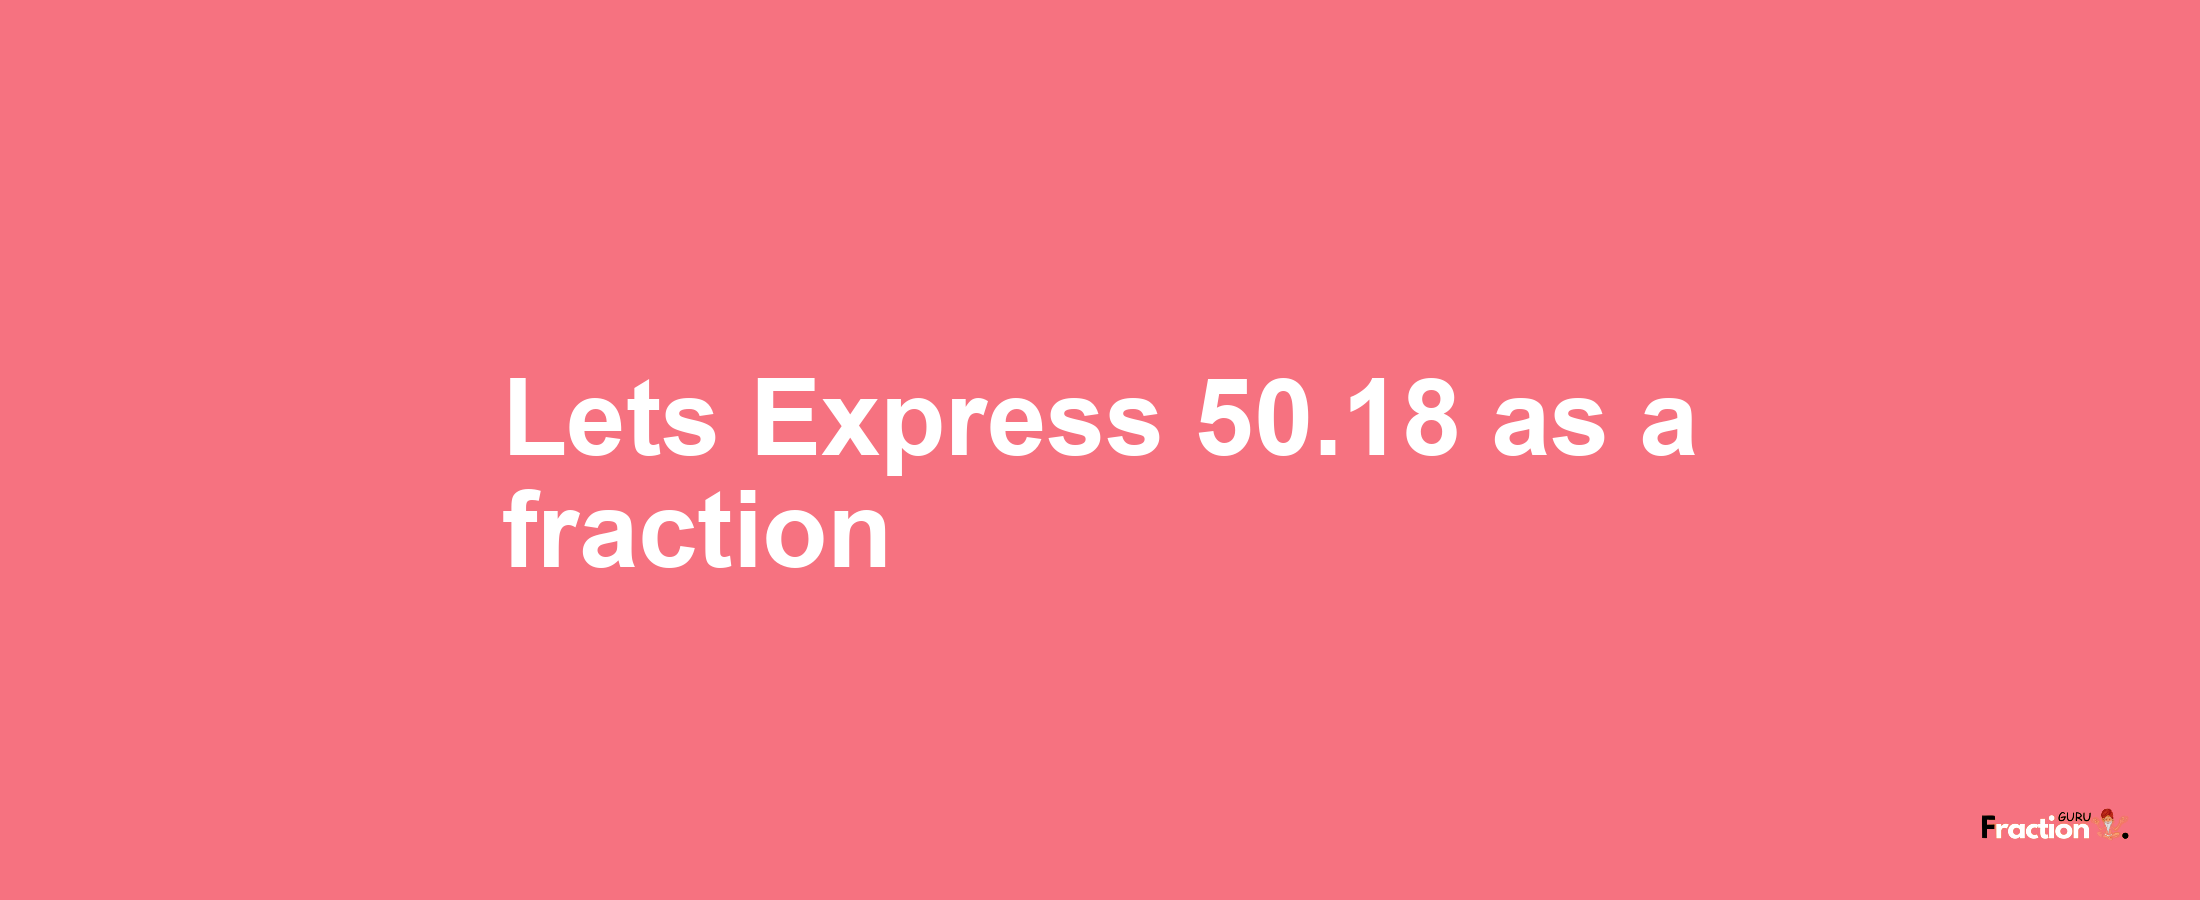 Lets Express 50.18 as afraction